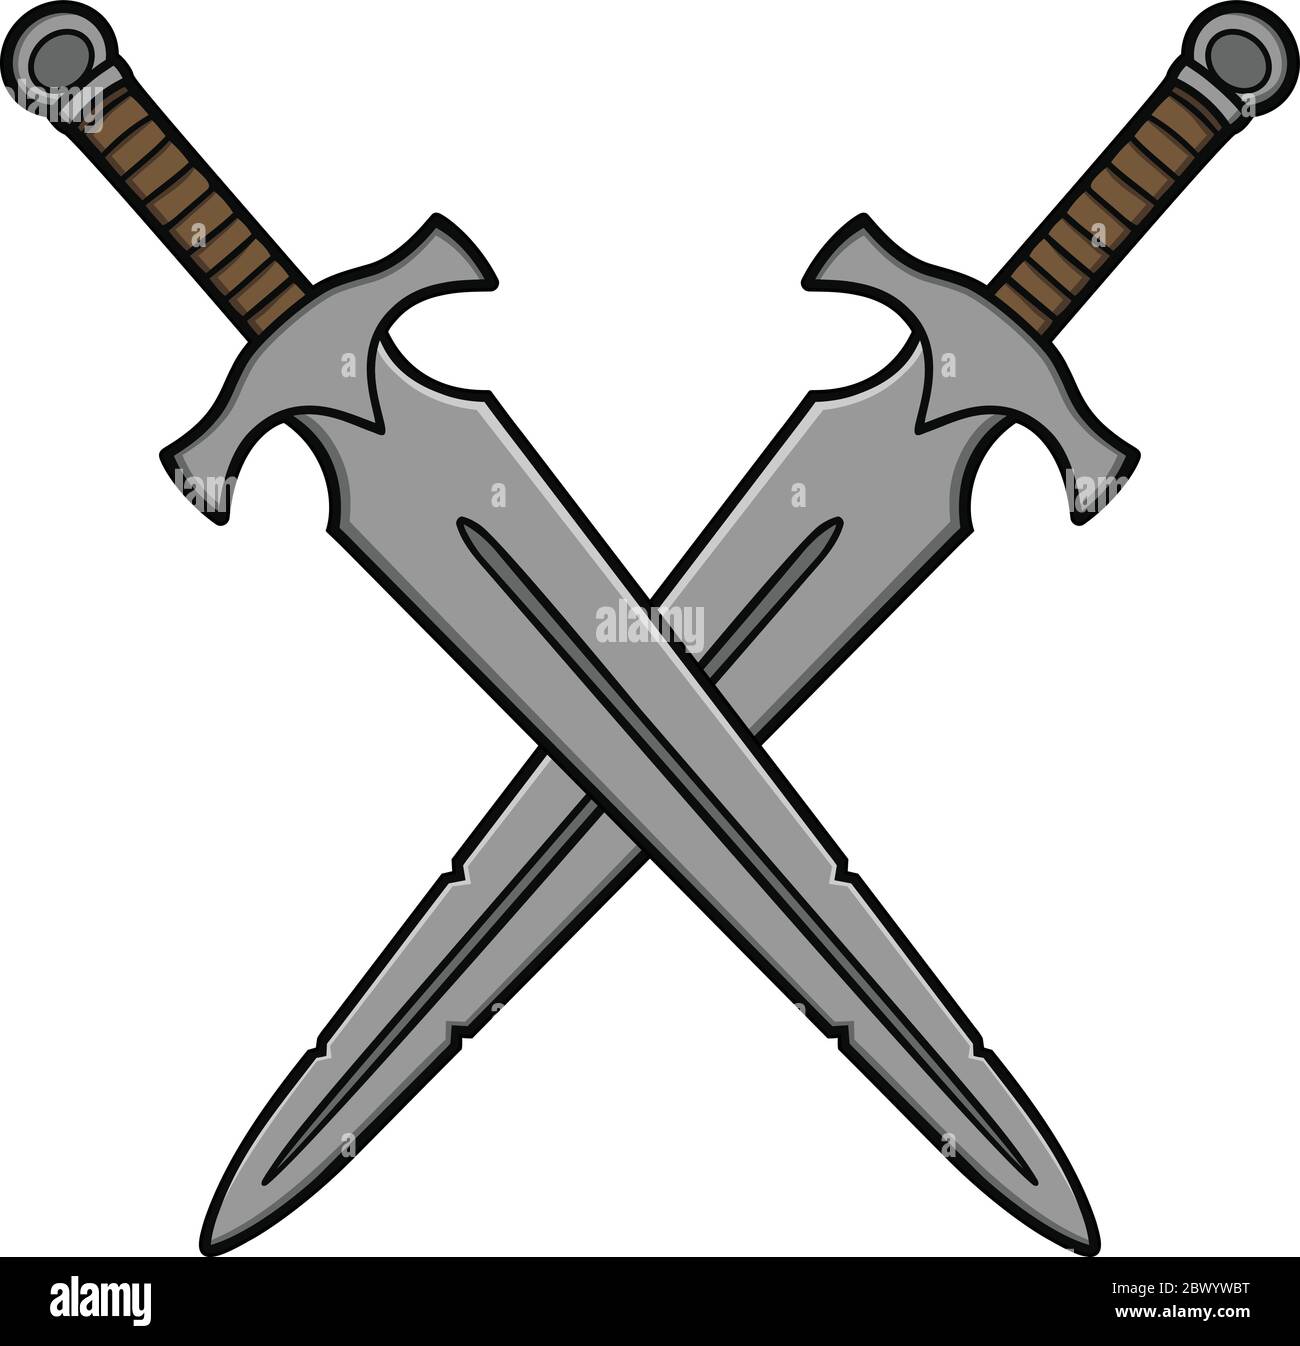 Two Swords Crossed Vector Images (over 630)